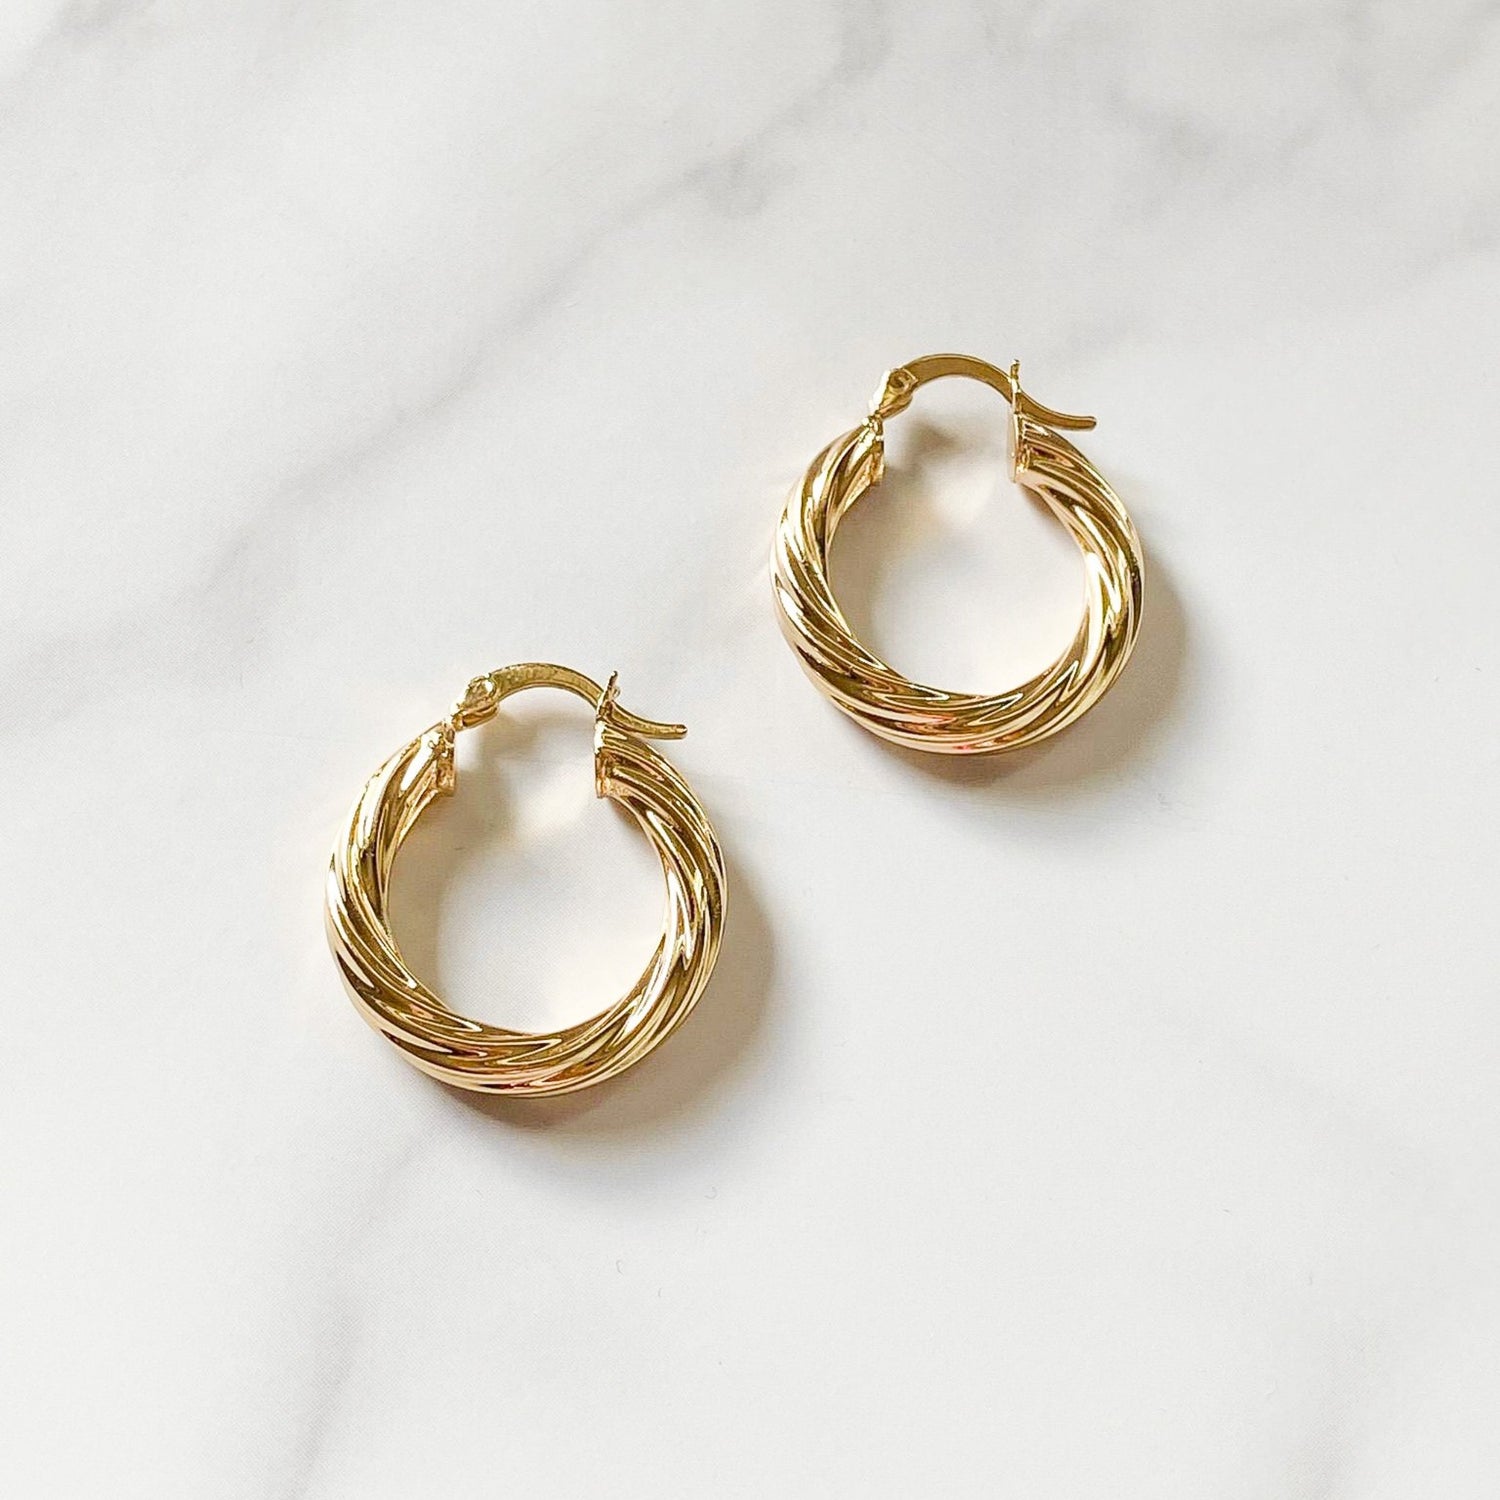 Rope gold-filled hoops by ISVI Boutique. Water-resistant and hypoallergenic earrings.